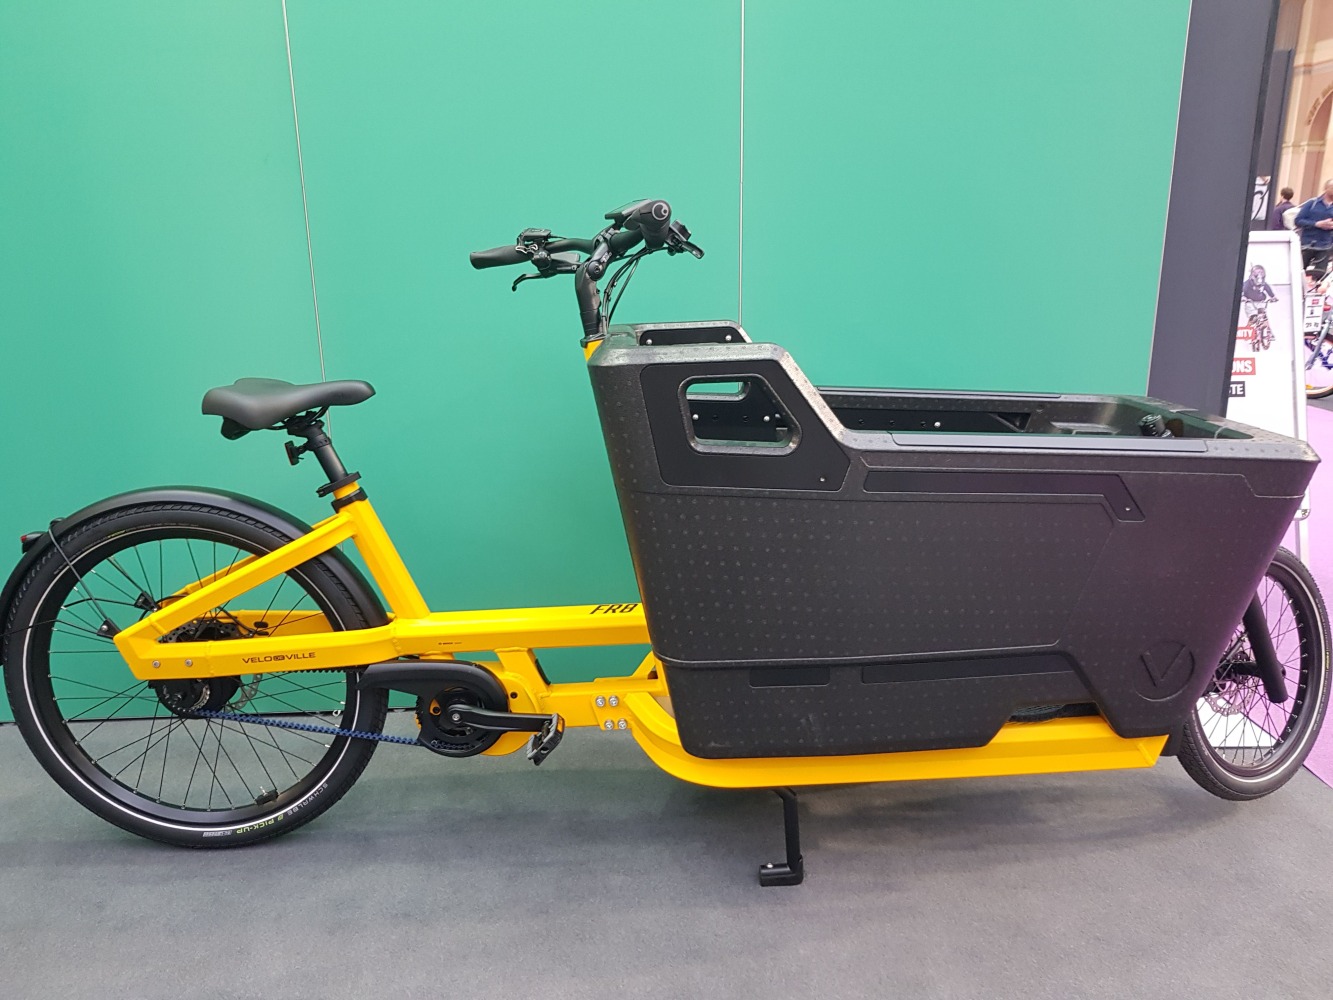 Velloville FR8 cargo bike at the 2023 cycle show